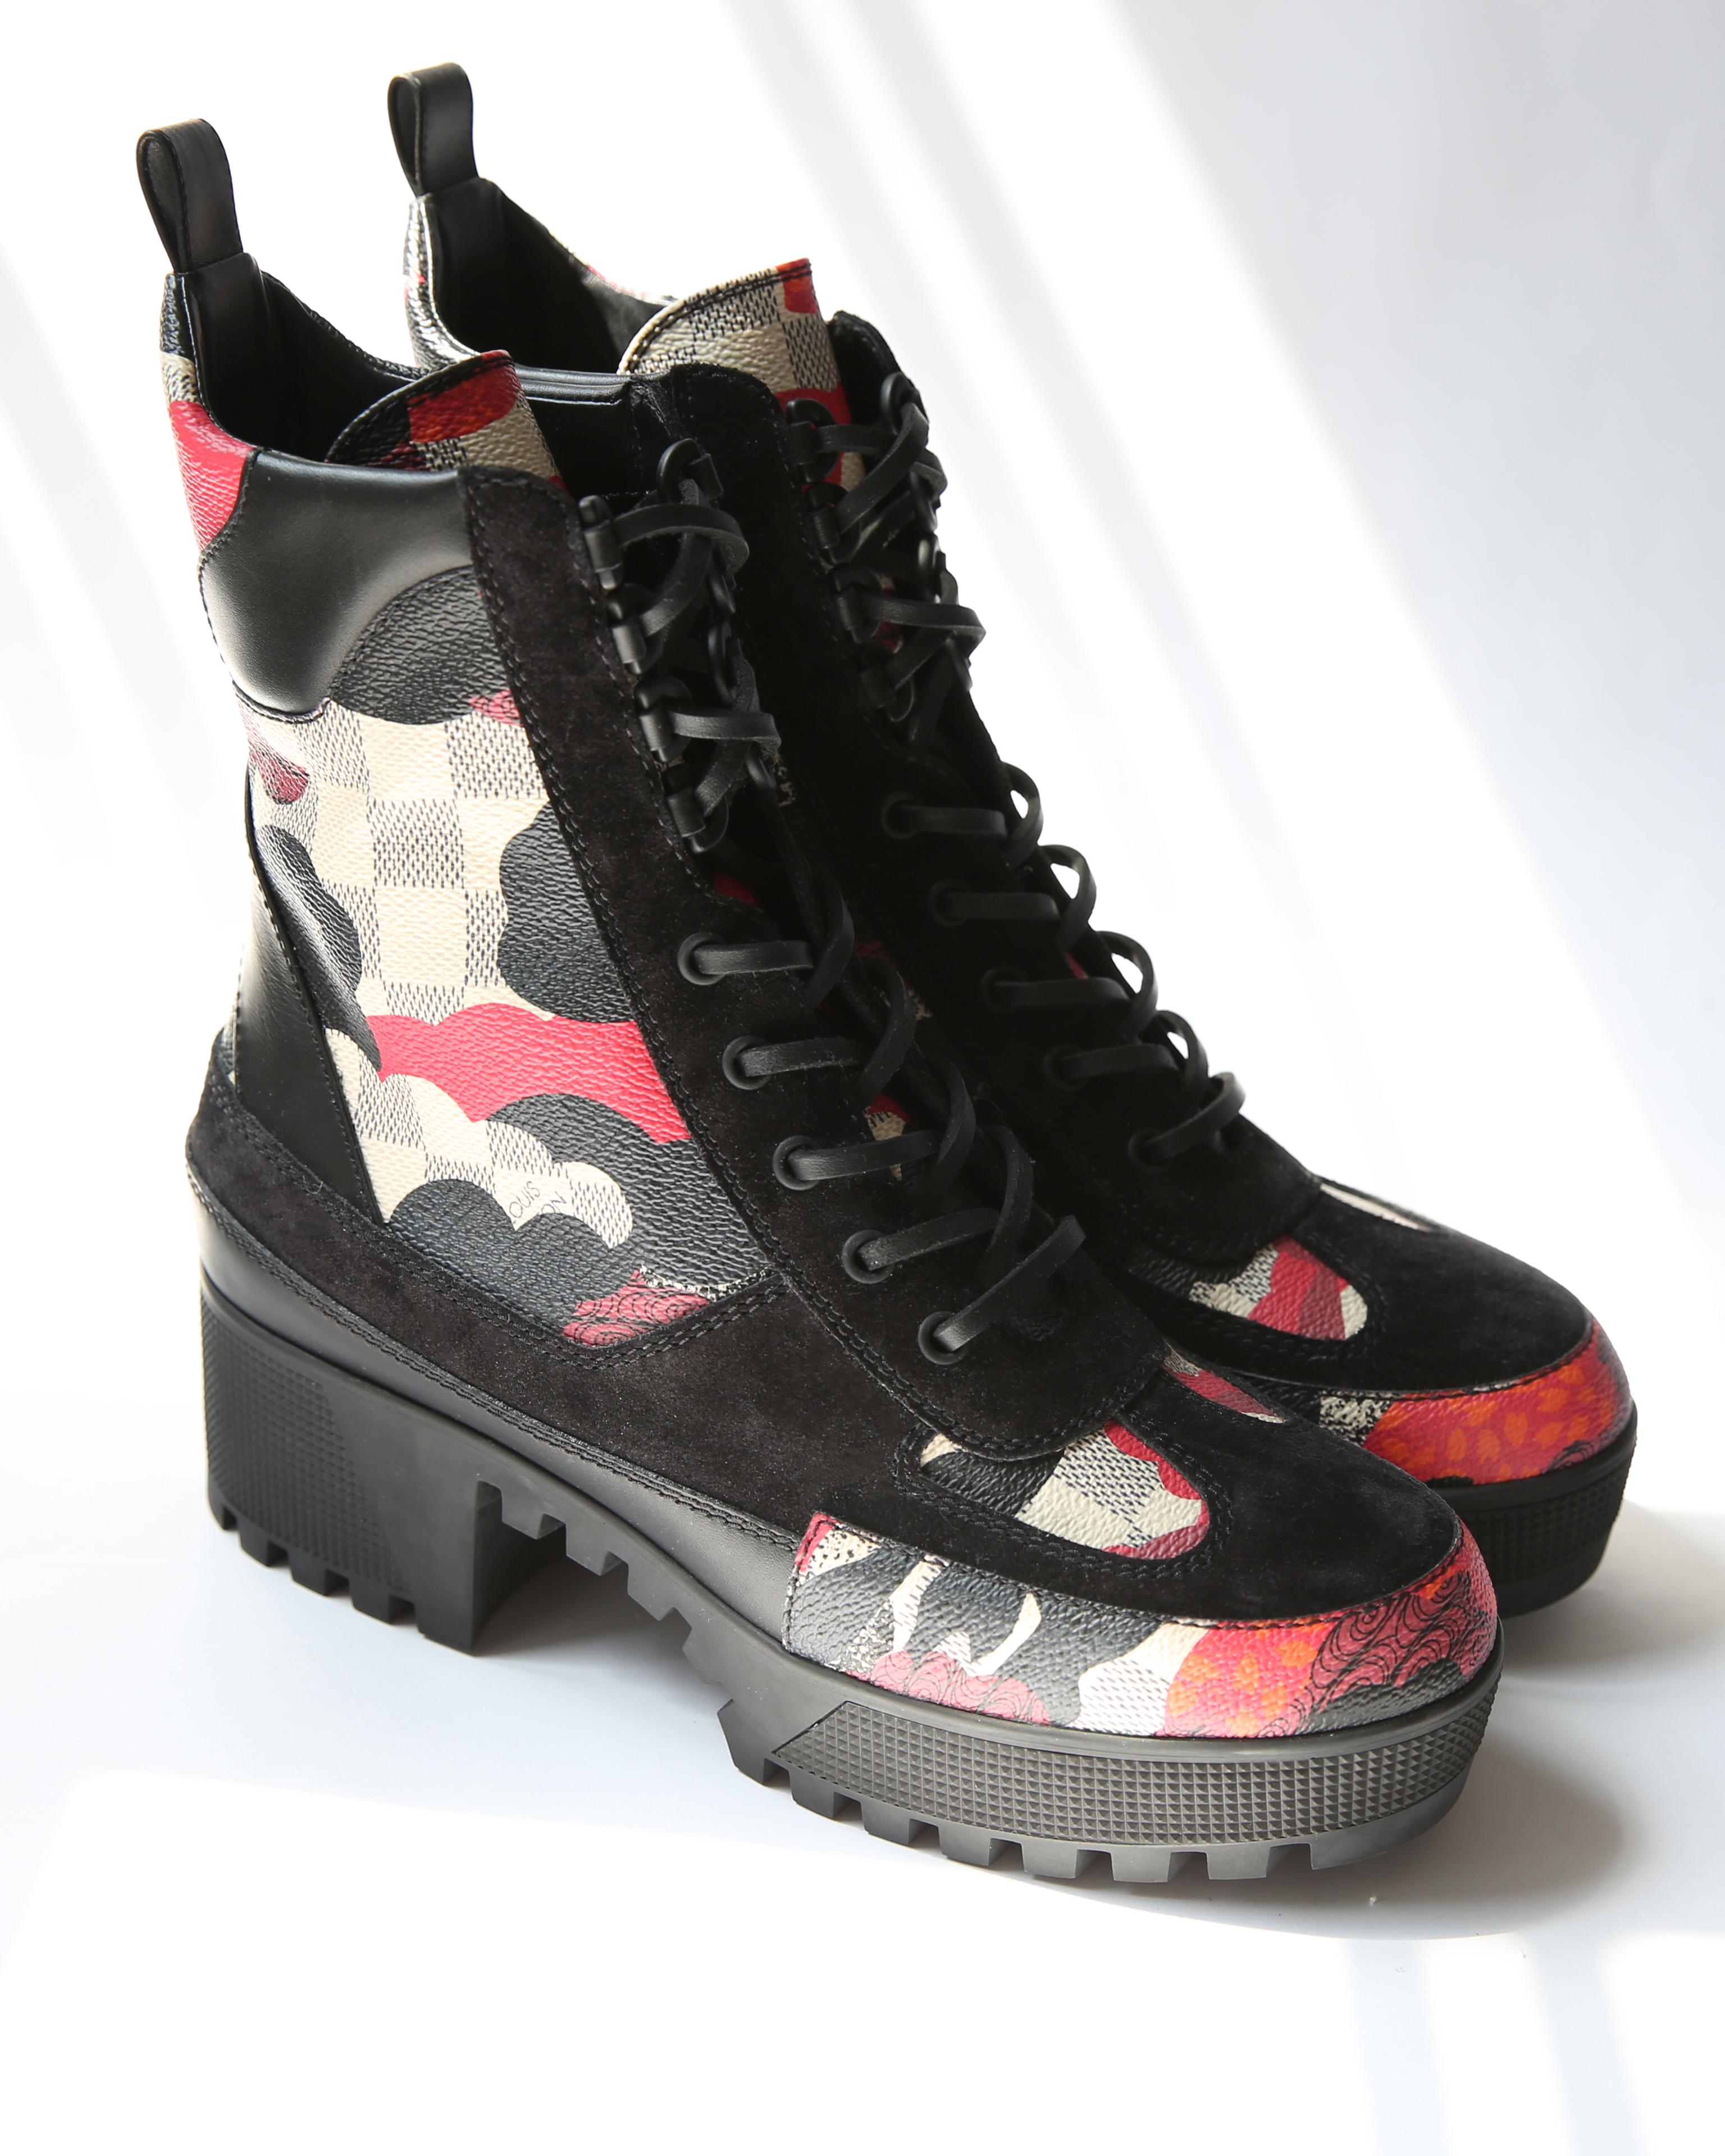 Louis Vuitton platform Laureate Desert ankle boots
Red, cream and black in leather and suede with cloud print
Come with their original box (the box shows sign of wear), dust bag, care card and receipt
These have only been tried on within the home